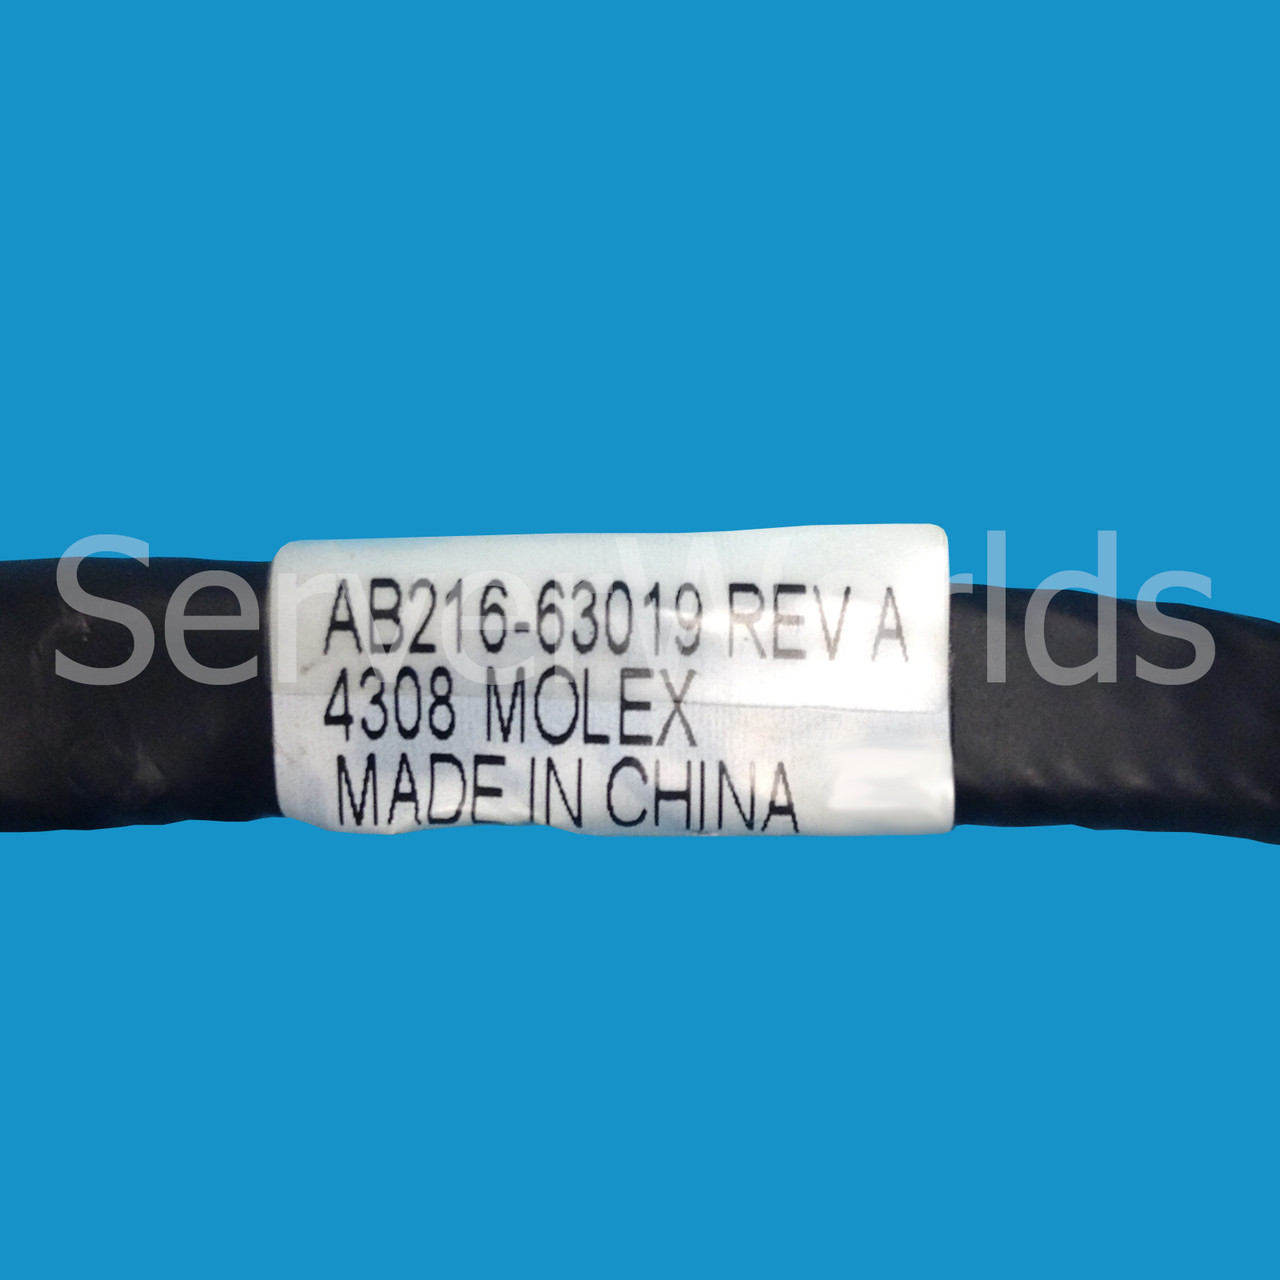 HP AB216-63019 CX2620 Fan Cable